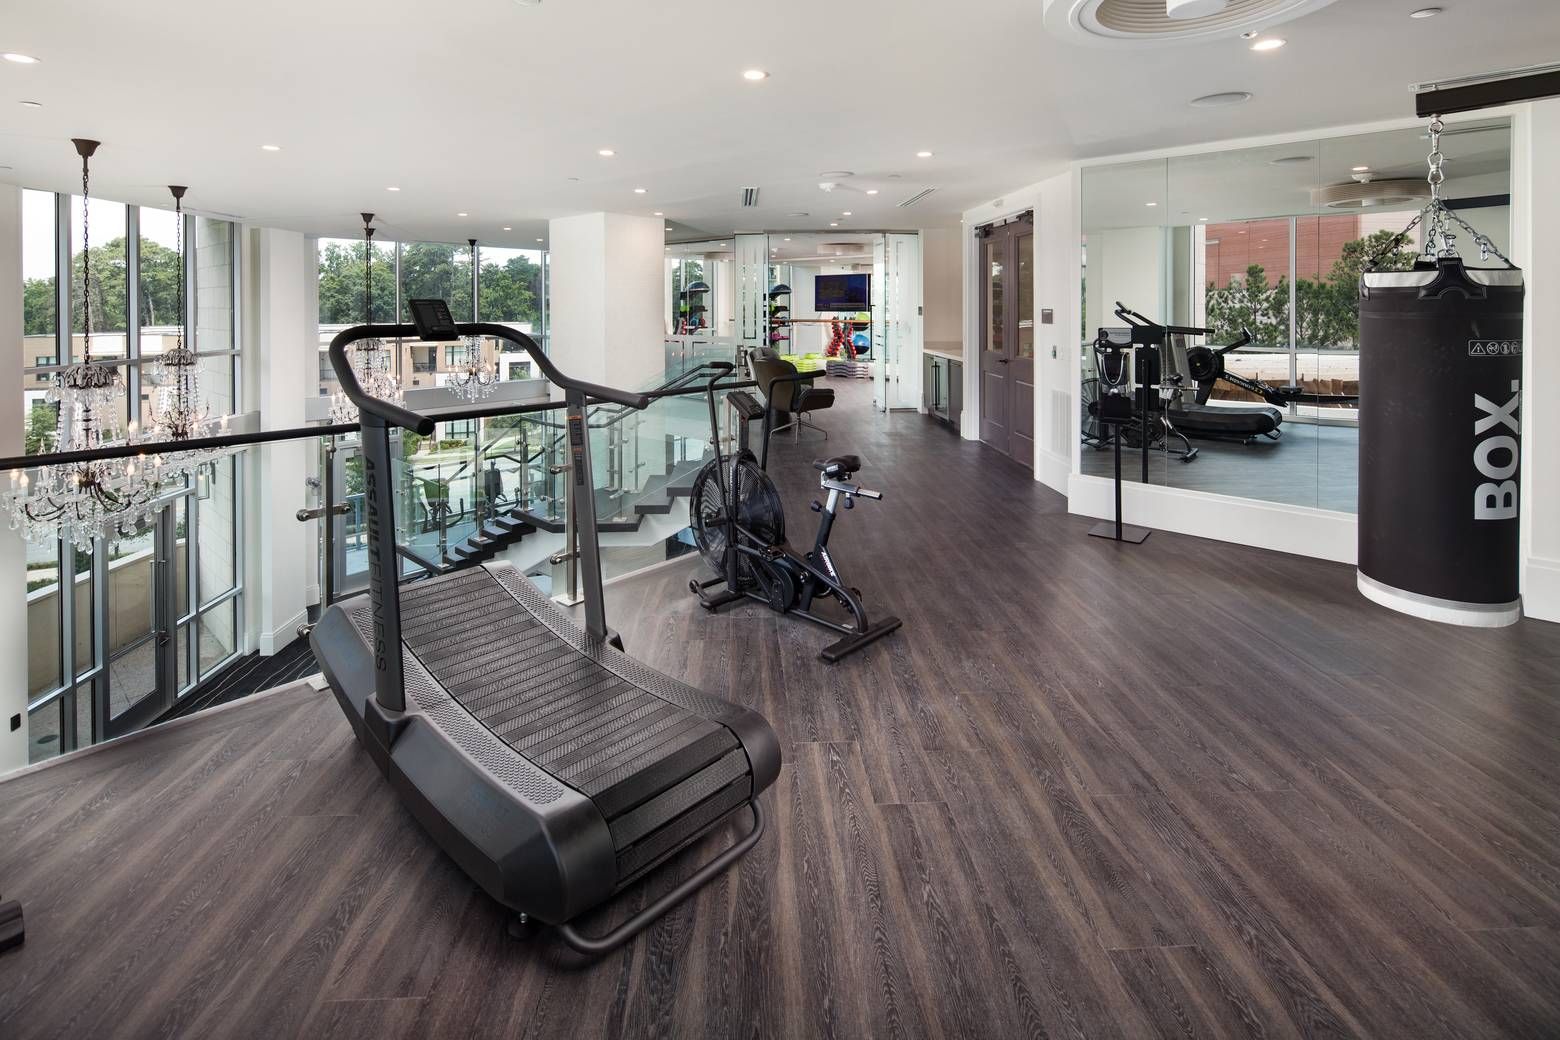 The Huntley fitness center top floor with various types of exercise equipment and mirrors.